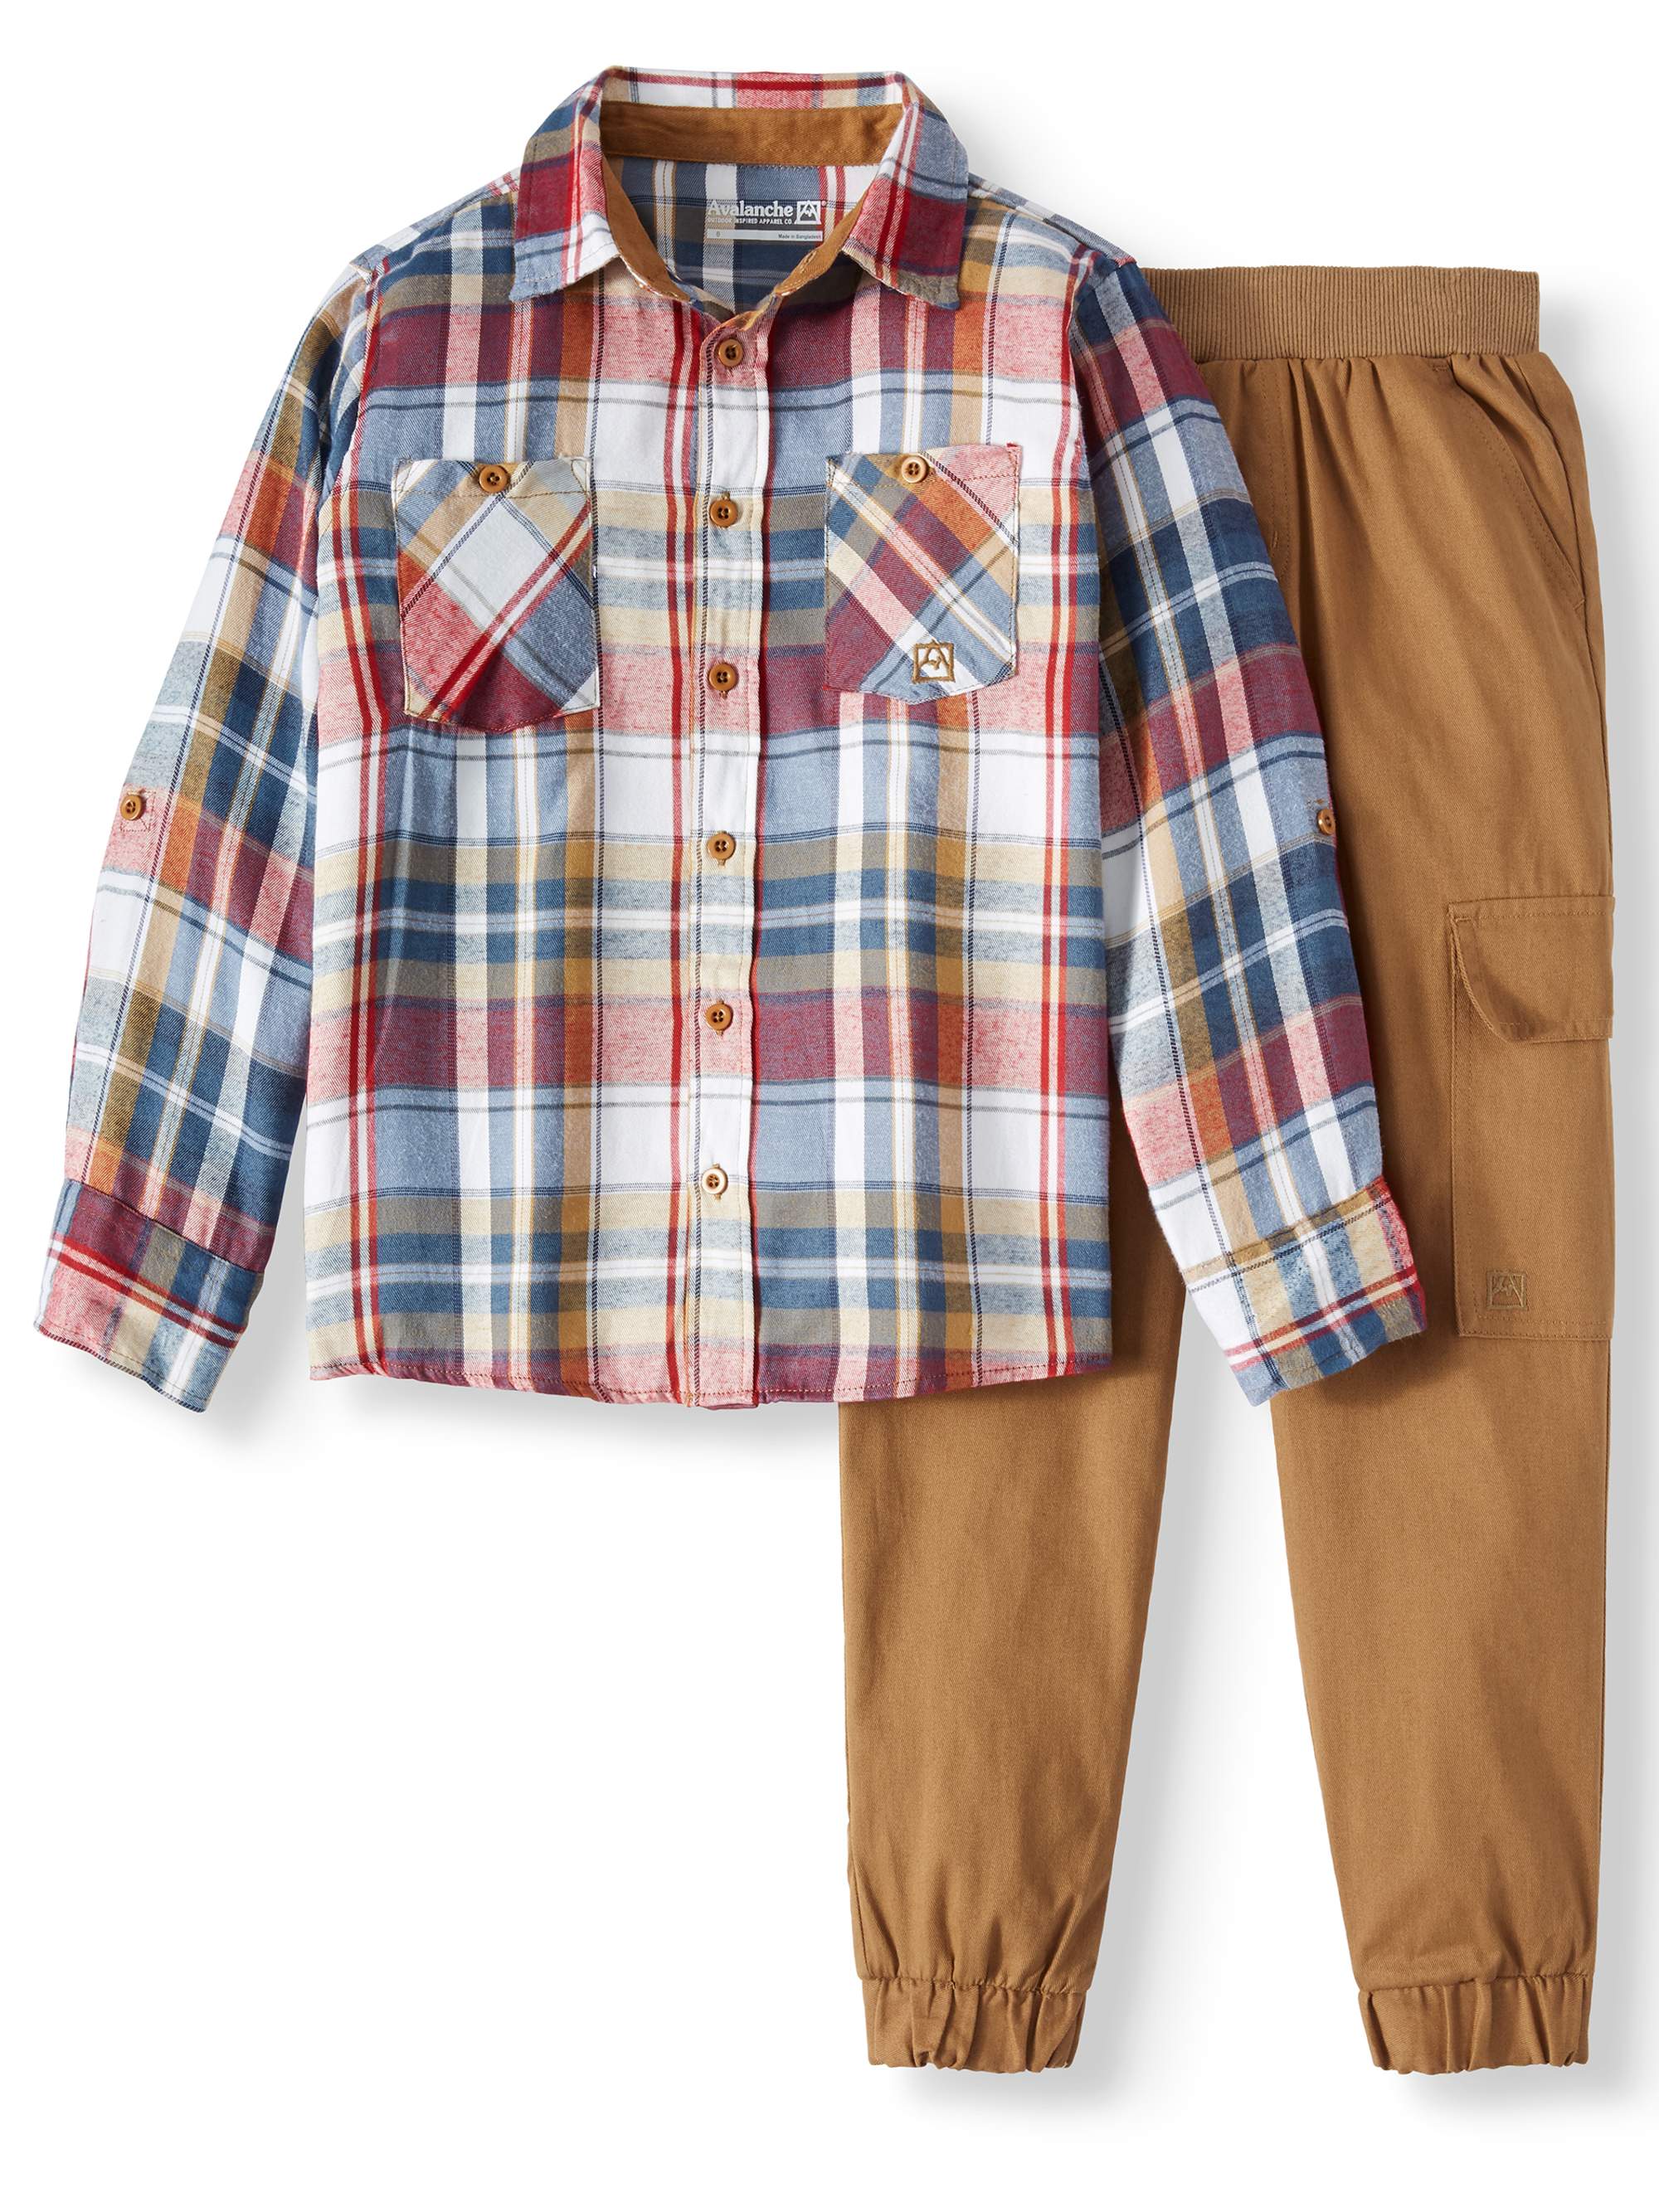 Long Sleeve Flannel Plaid Shirt with Twill Cargo Pants, 2-Piece Set (Little Boys & Big Boys) - image 1 of 3